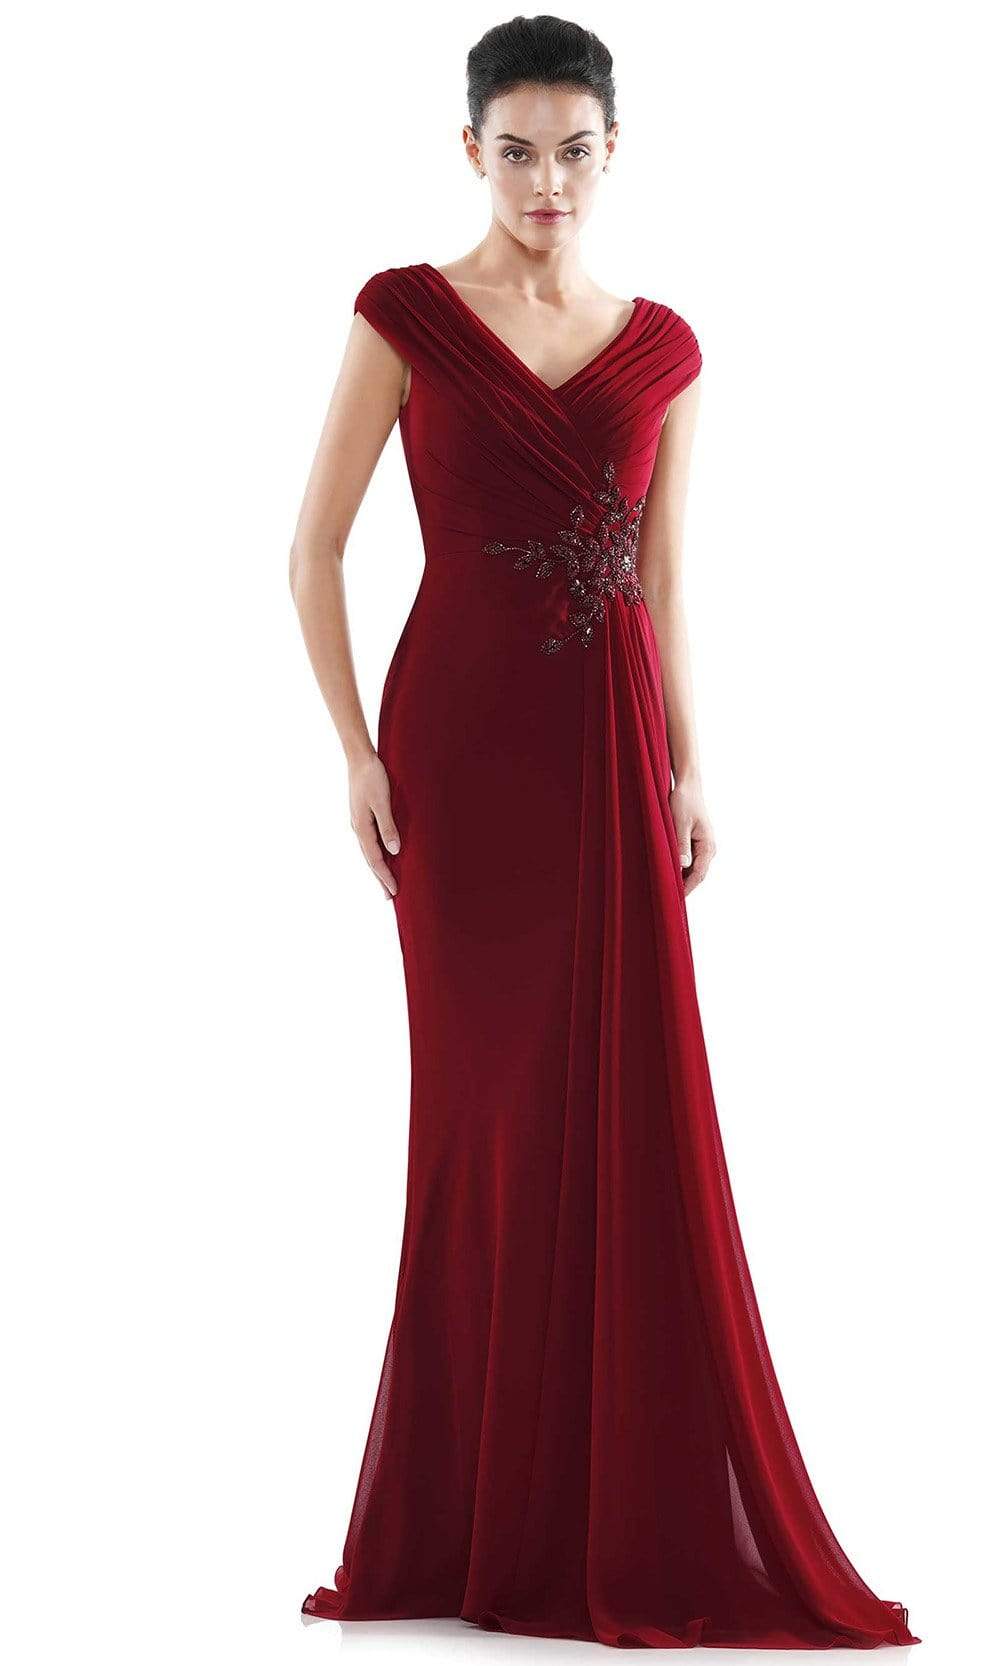 Marsoni by Colors - MV1080 Cap Sleeve Foliage Beaded Sheath Gown Mother of the Bride Dresses 4 / Wine